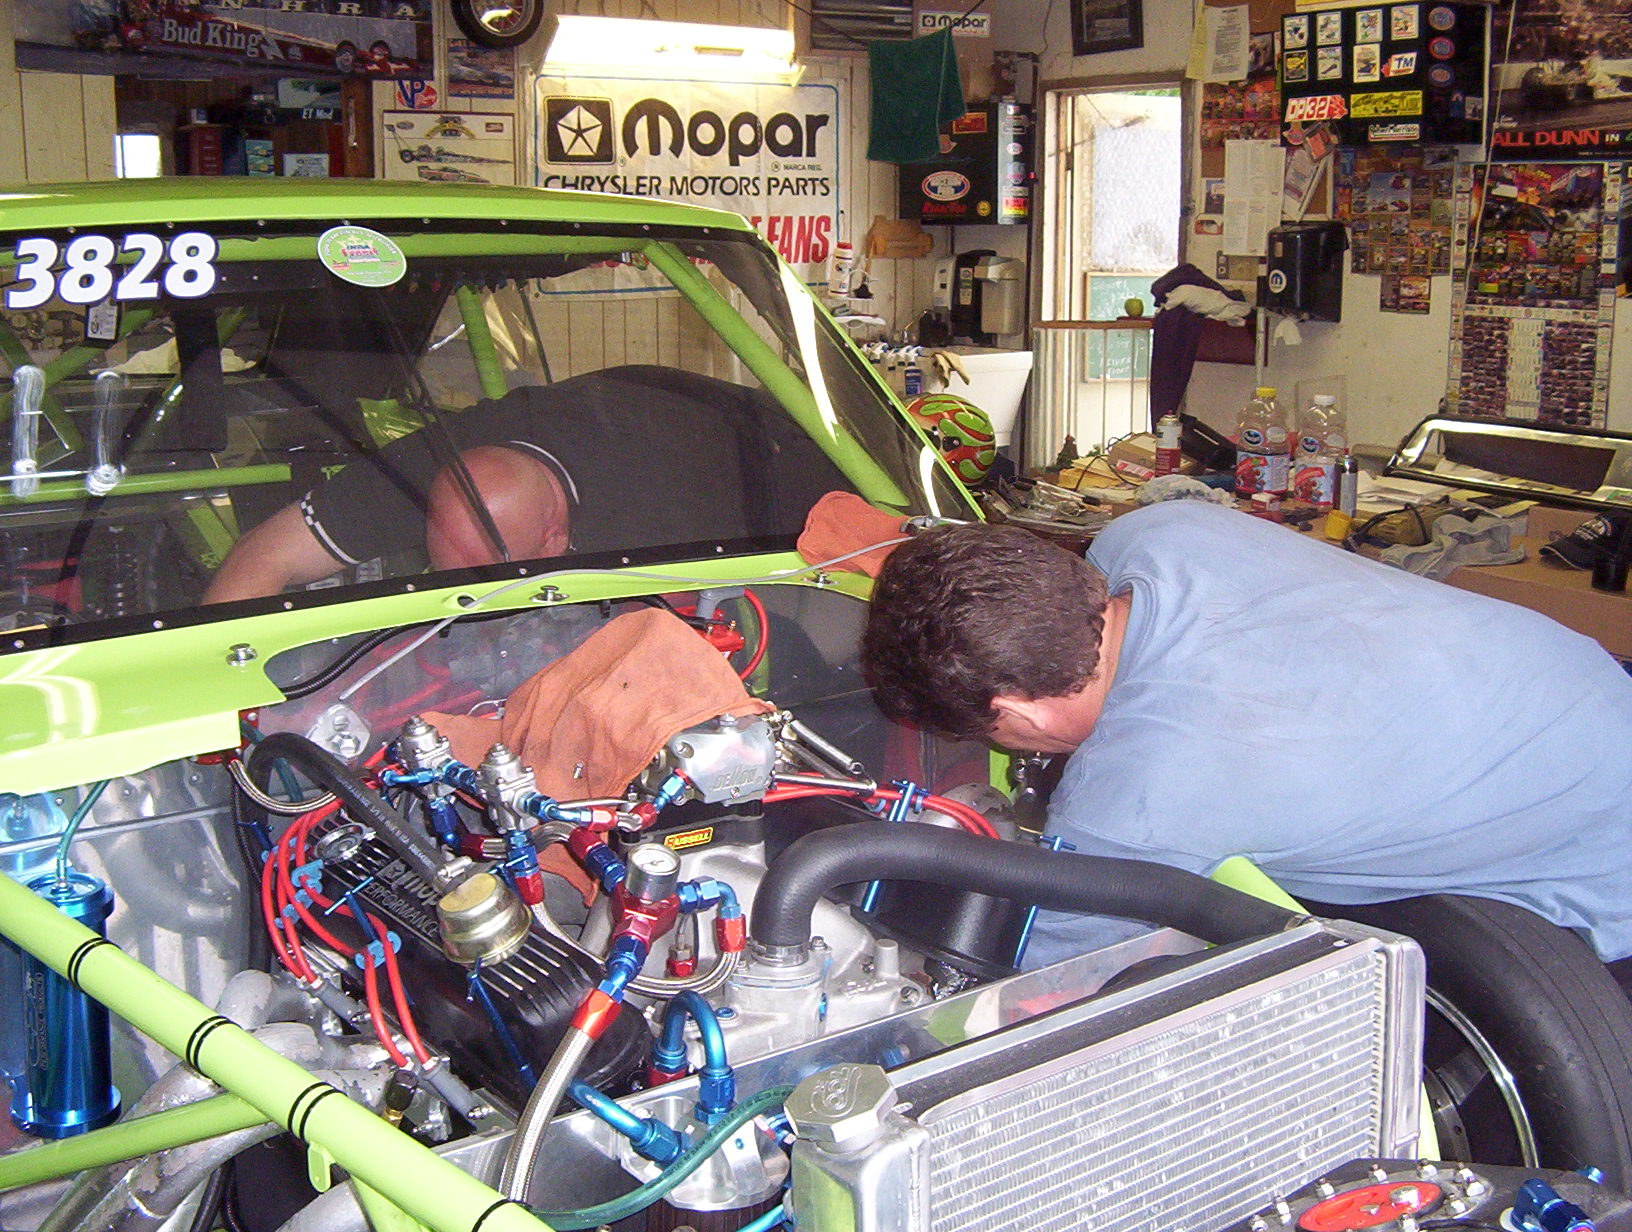 Making adjustments to the motor of his dart